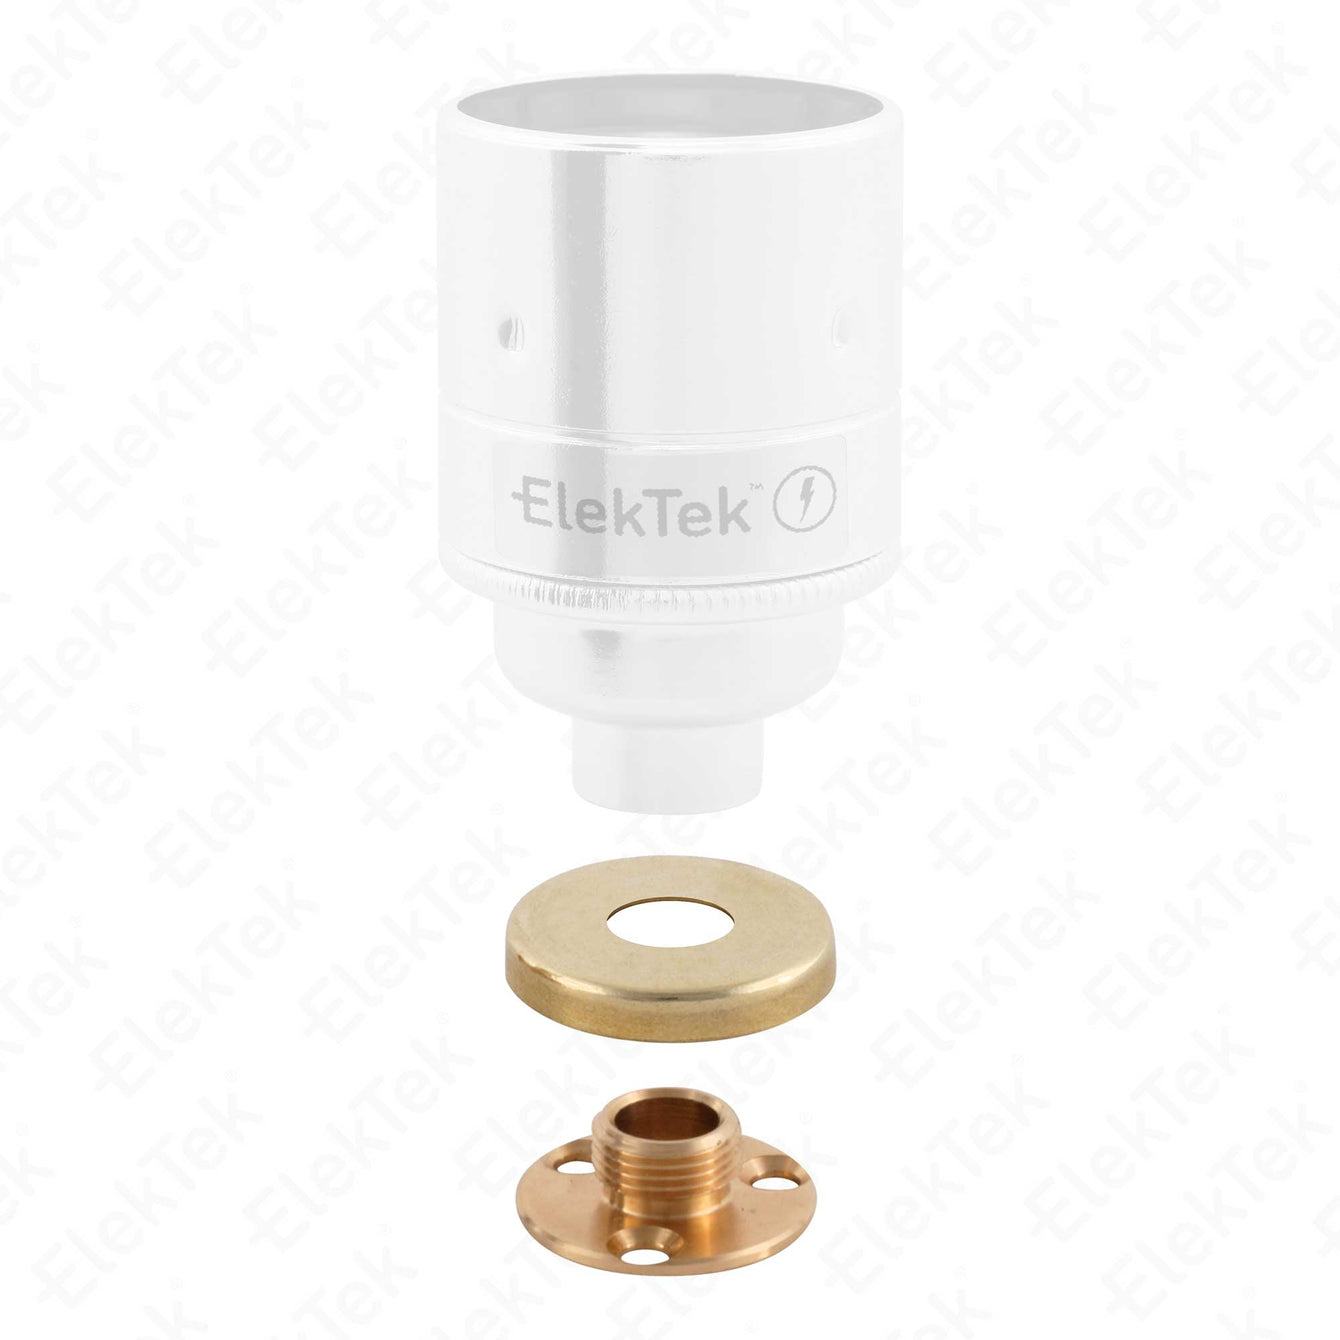 ElekTek Male Thread Back Plate Mount Cover and Screws - For use with B22 E27 Lamp holders Antique Brass / Half Inch